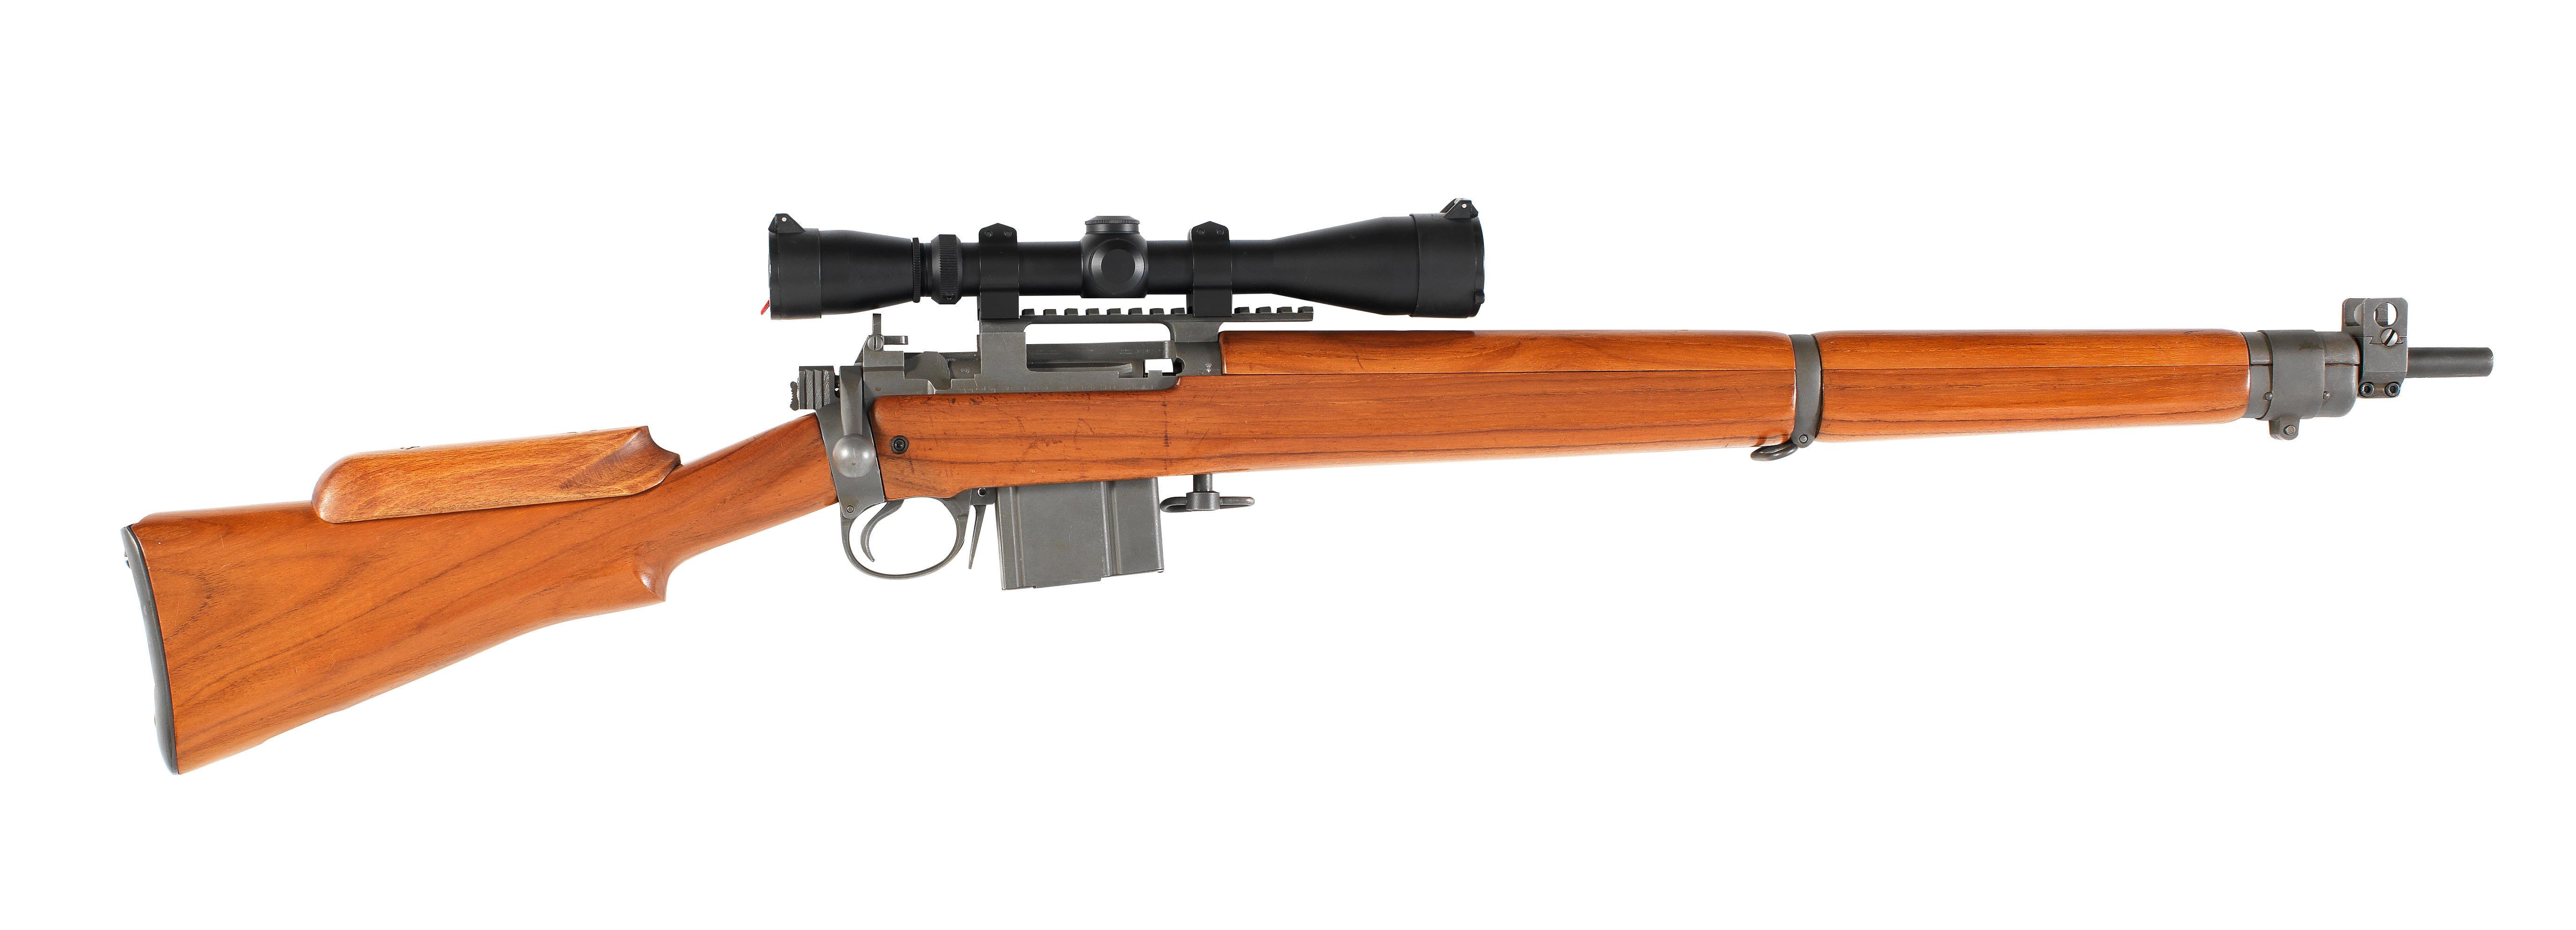 Used Lee Enfield No.4 MK 1 Bolt Action Rifle, 7.62 Nato(144gr or 7.62  Cetme) Conversion, 25 Barrel, Full Wood, 1 Mag, Good Condition. Reliable  Gun: Firearms, Ammunition & Outdoor Gear in Canada